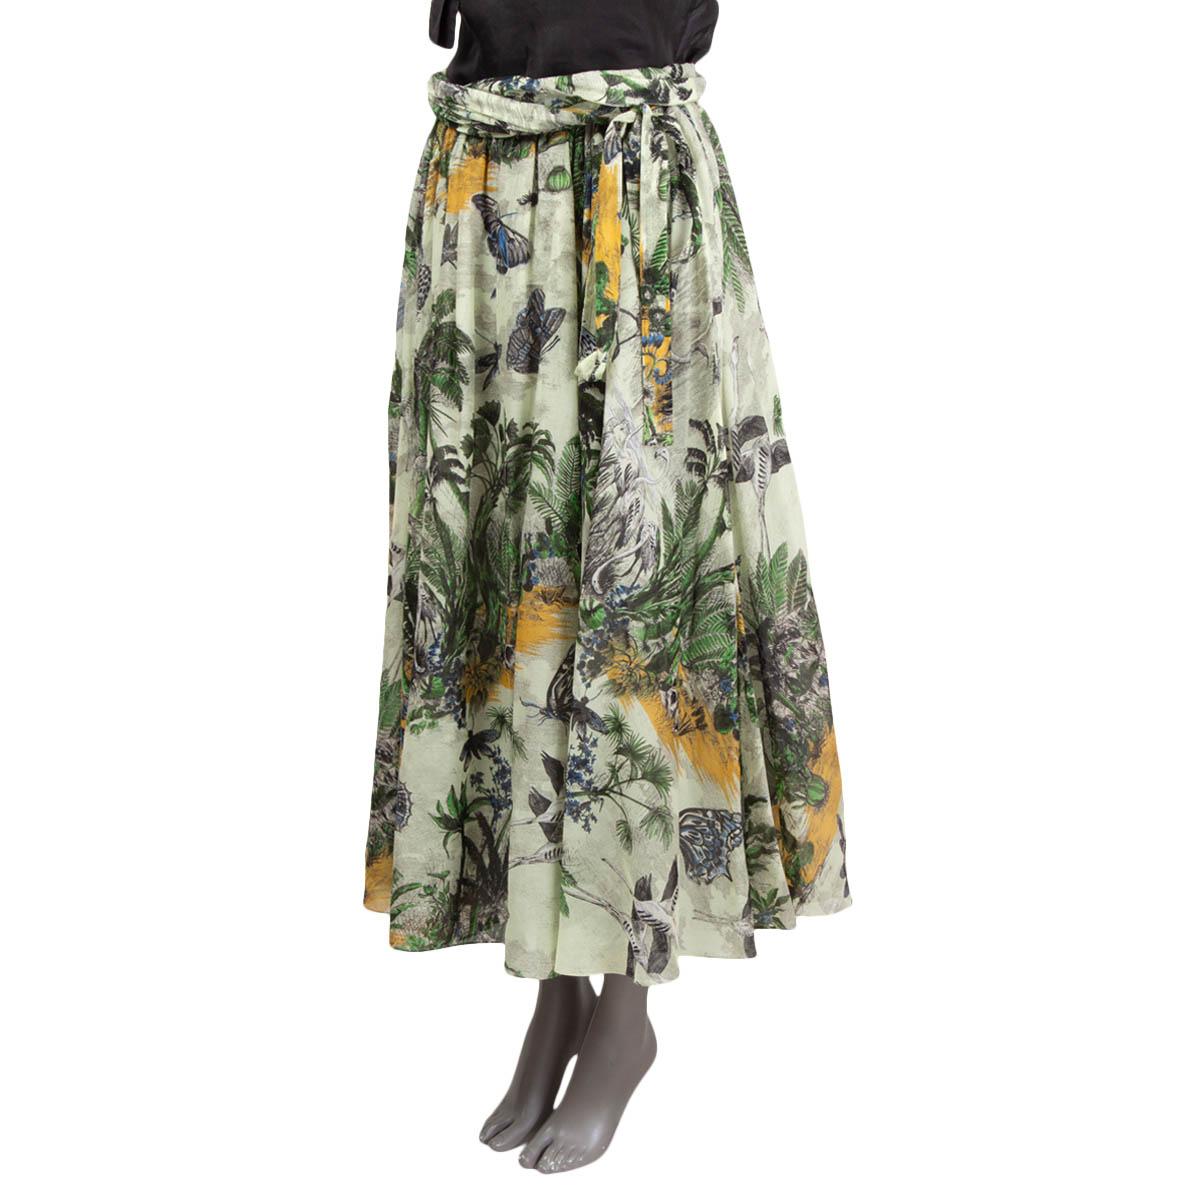 100% authentic Christian Dior 2019 Toile de Jouy Tropicalia flared midi skirt in pale mint green, green, black, blue, light grey and mustard. Opens with a zipper on the side and is lined in white soft tulle polyamide (100%). The design features a